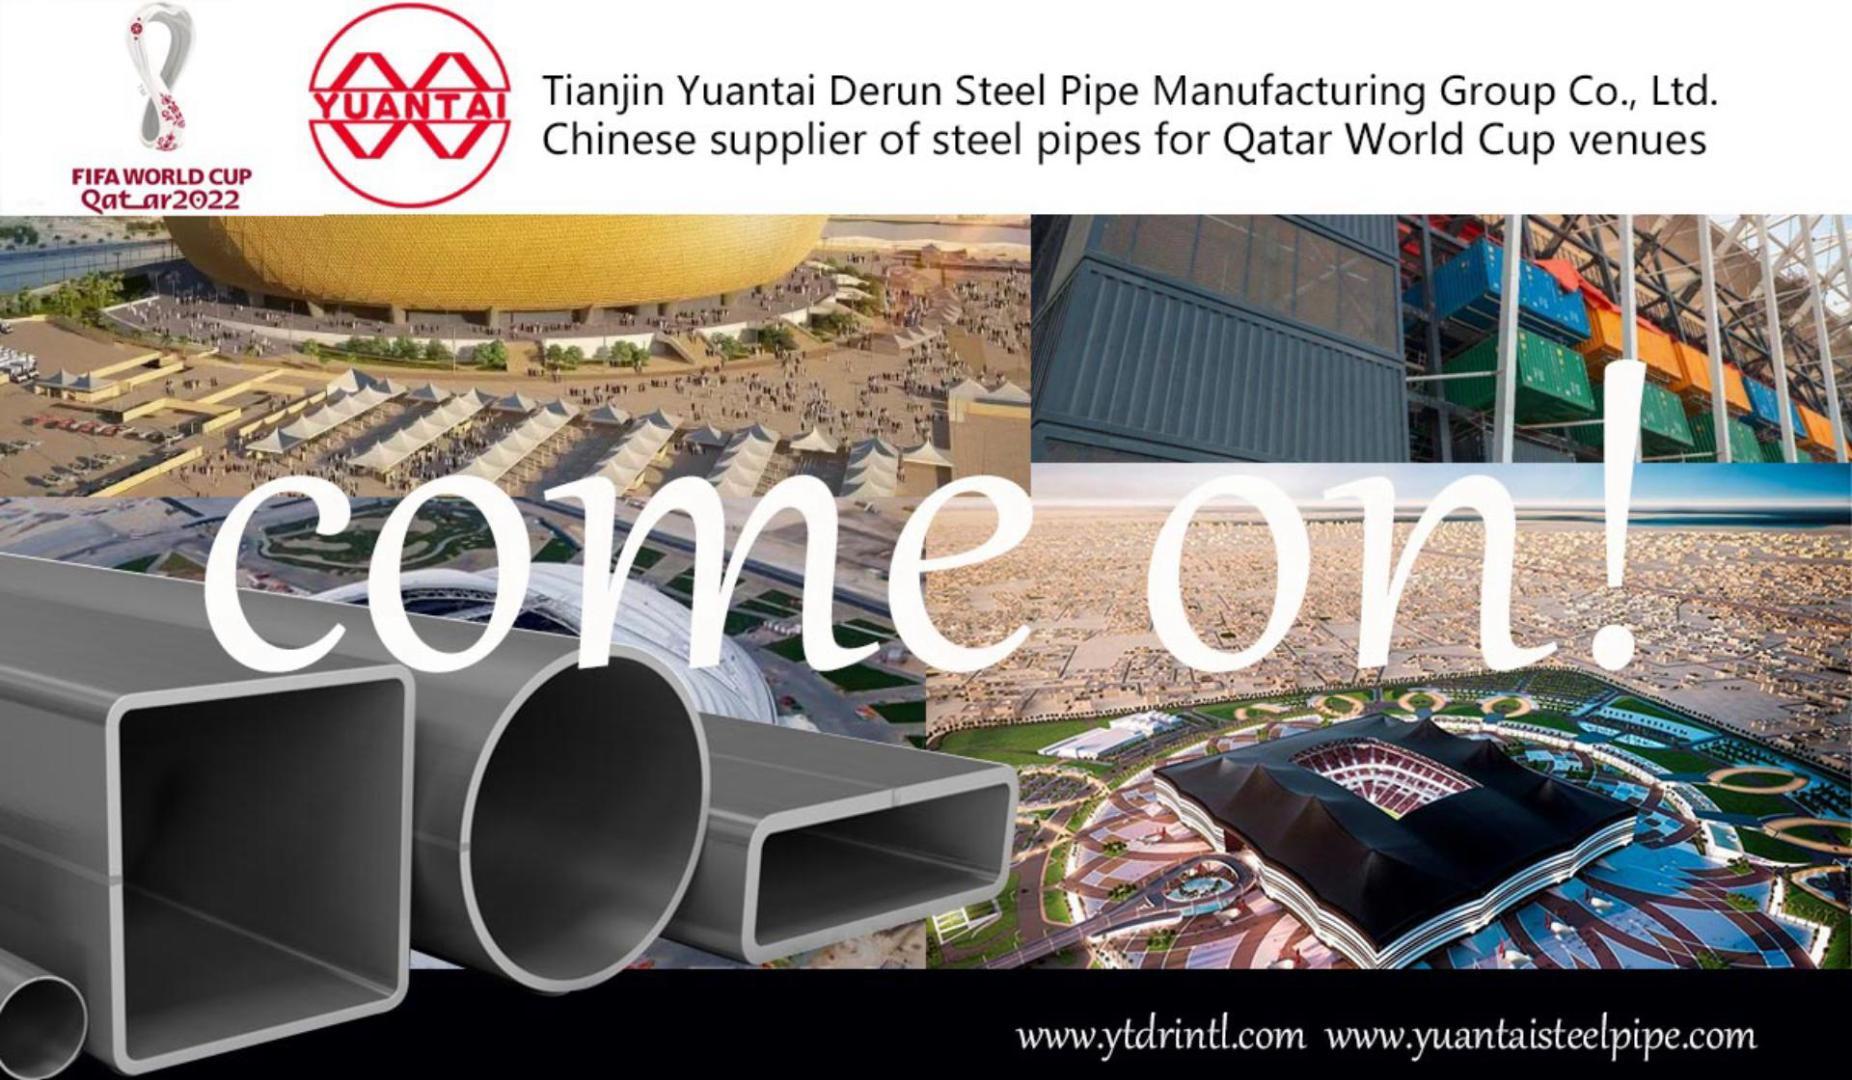 Tianjin Yuantai Derun Steel Pipe Manufacturing Group Co., Ltd  Qatar World Cup venue project supply details: